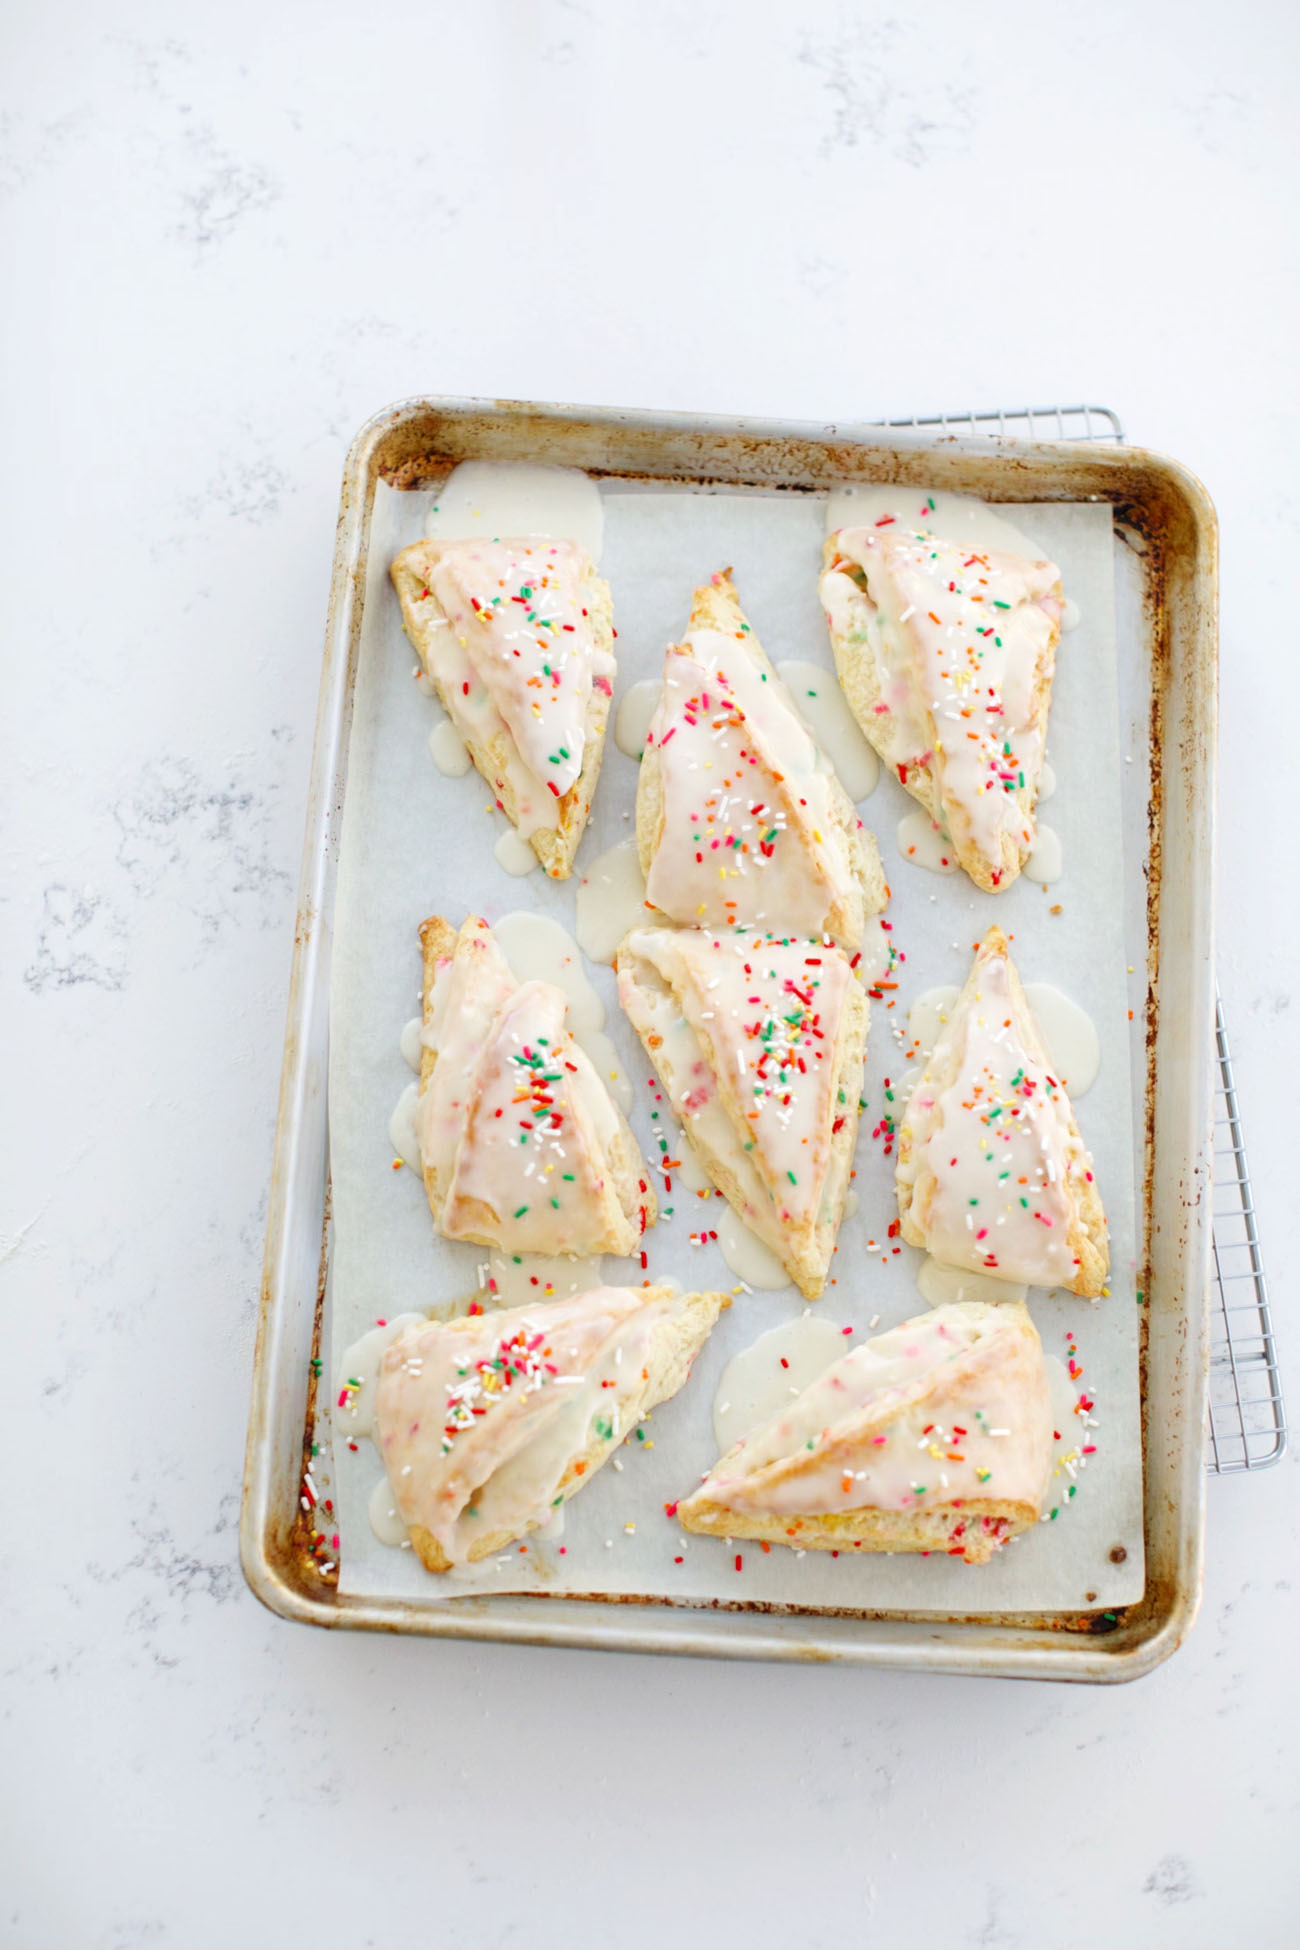 sprinkles cones with icing on baking tray